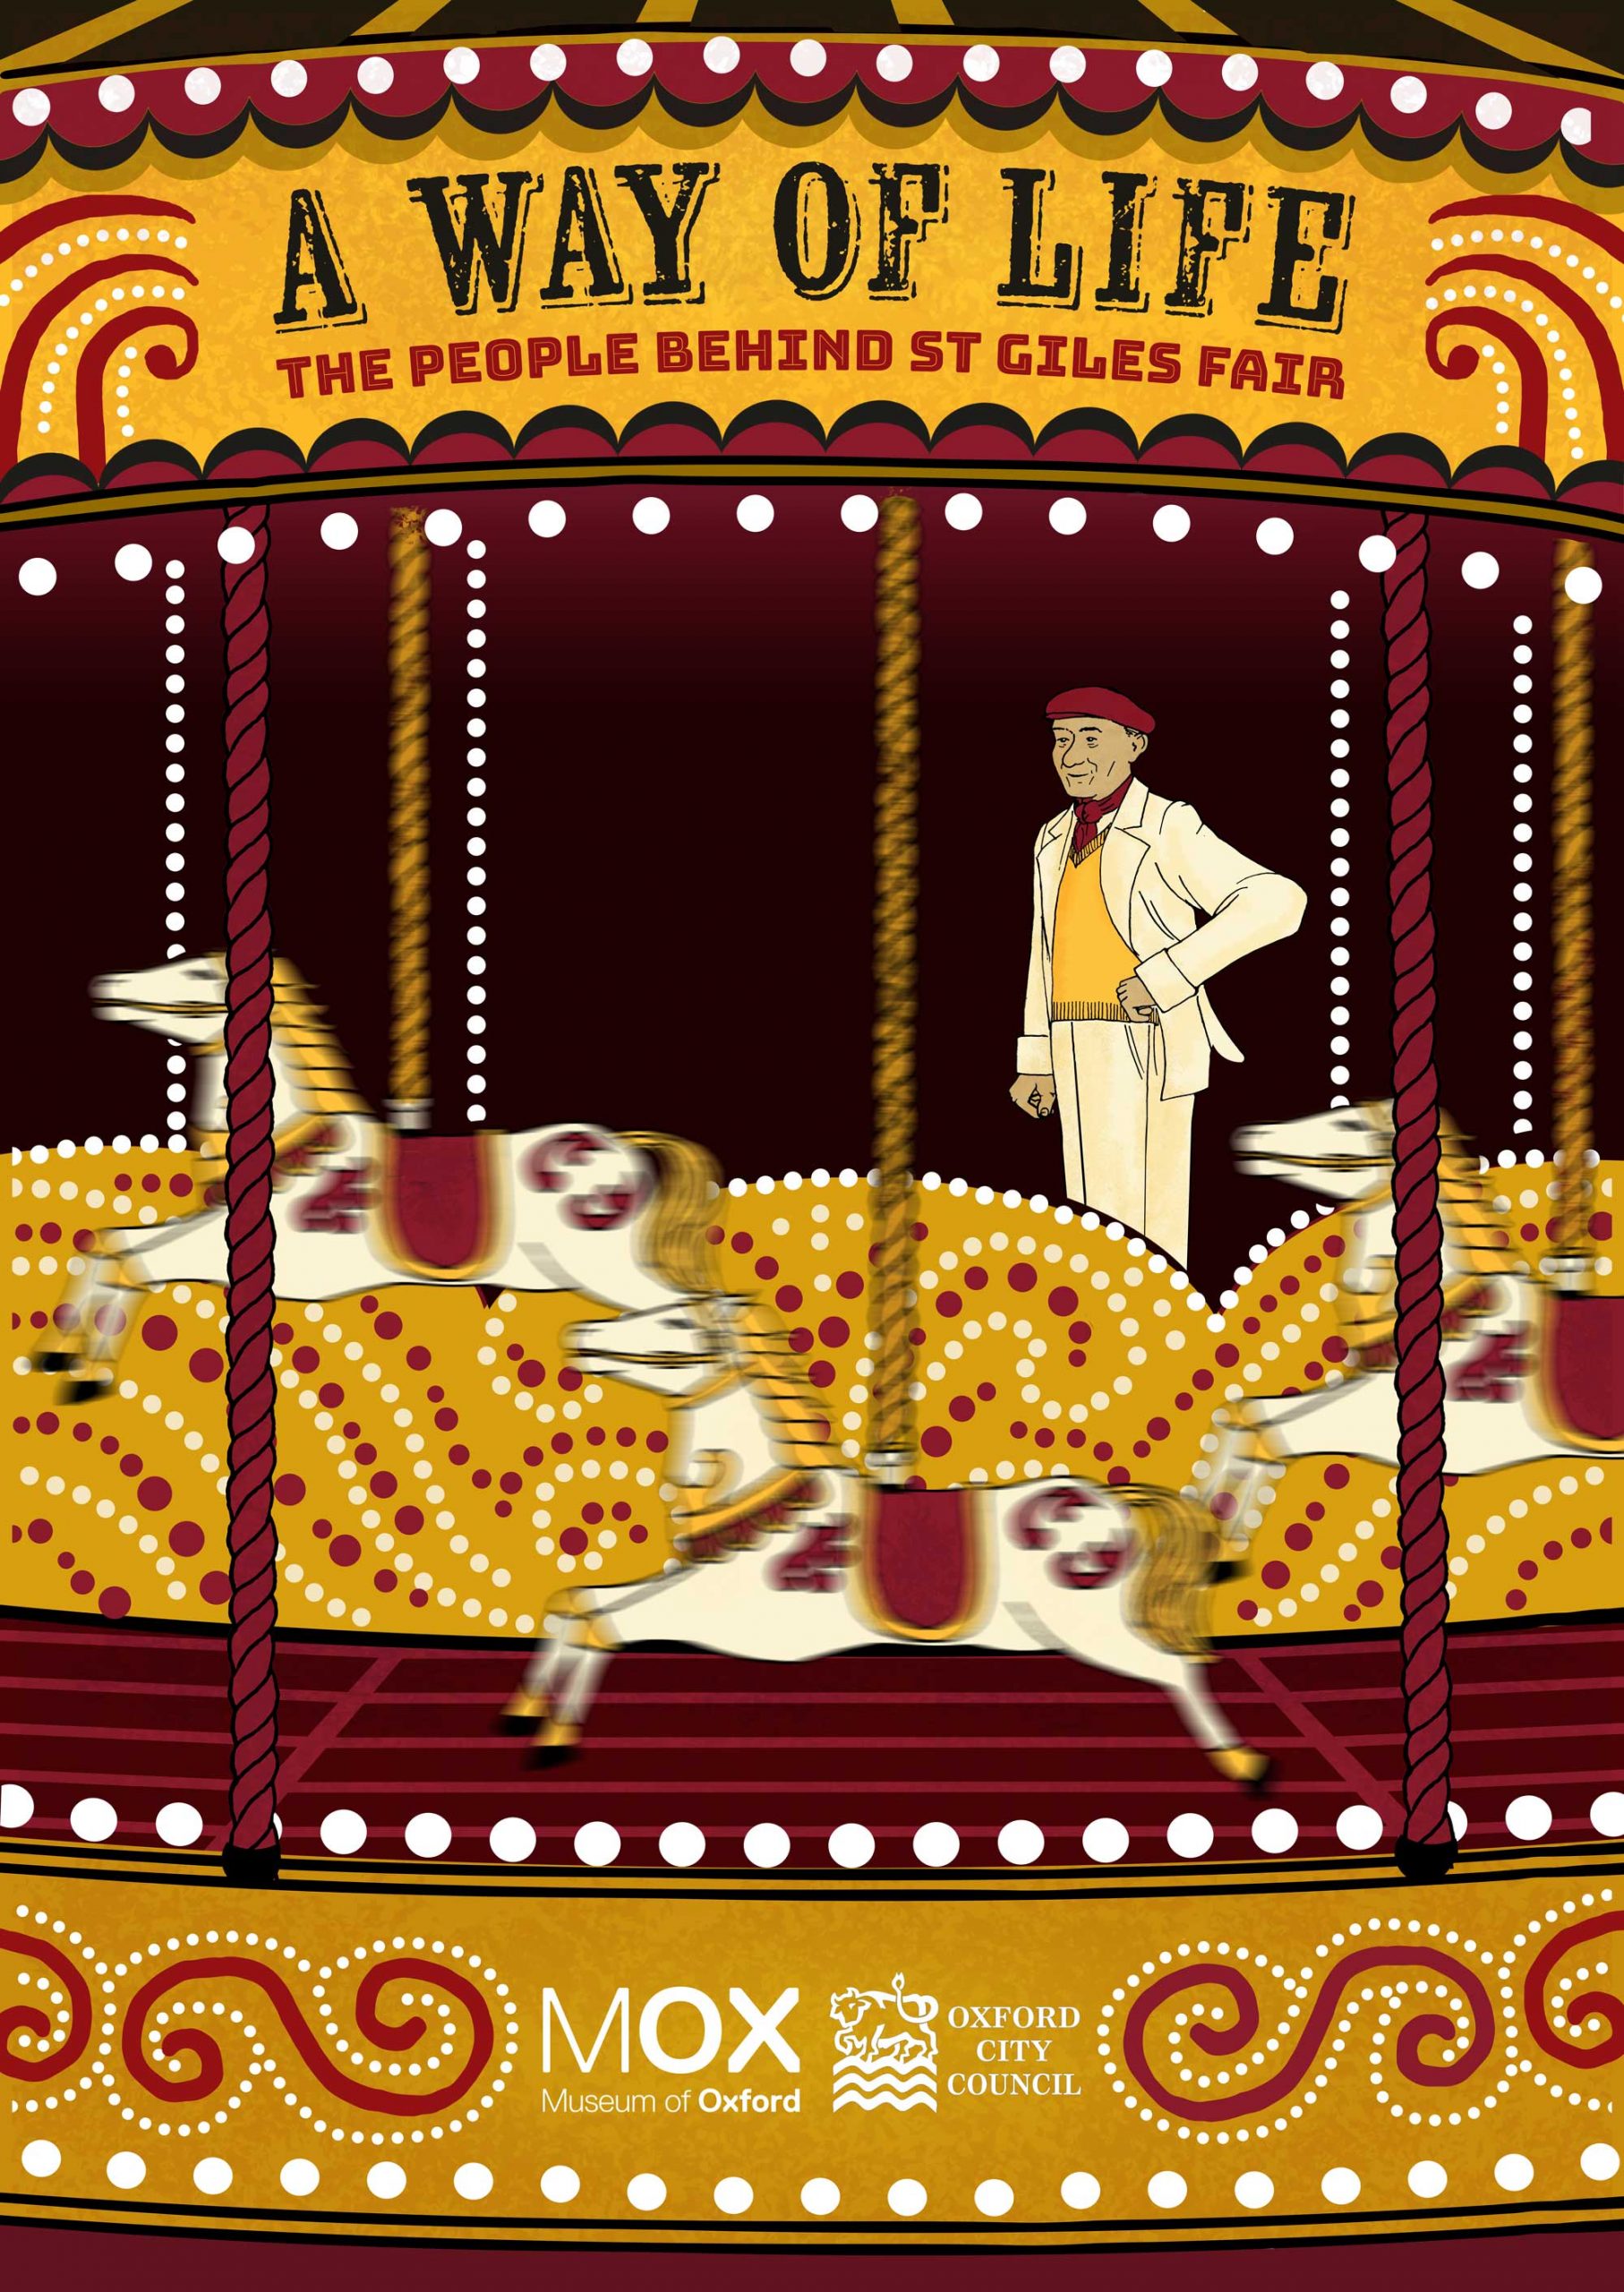 Exhibition poster with a graphic showing a blurred image of a horse on a merry-go-round, and a focused figure of the ride operator, dressed in smart clothing.